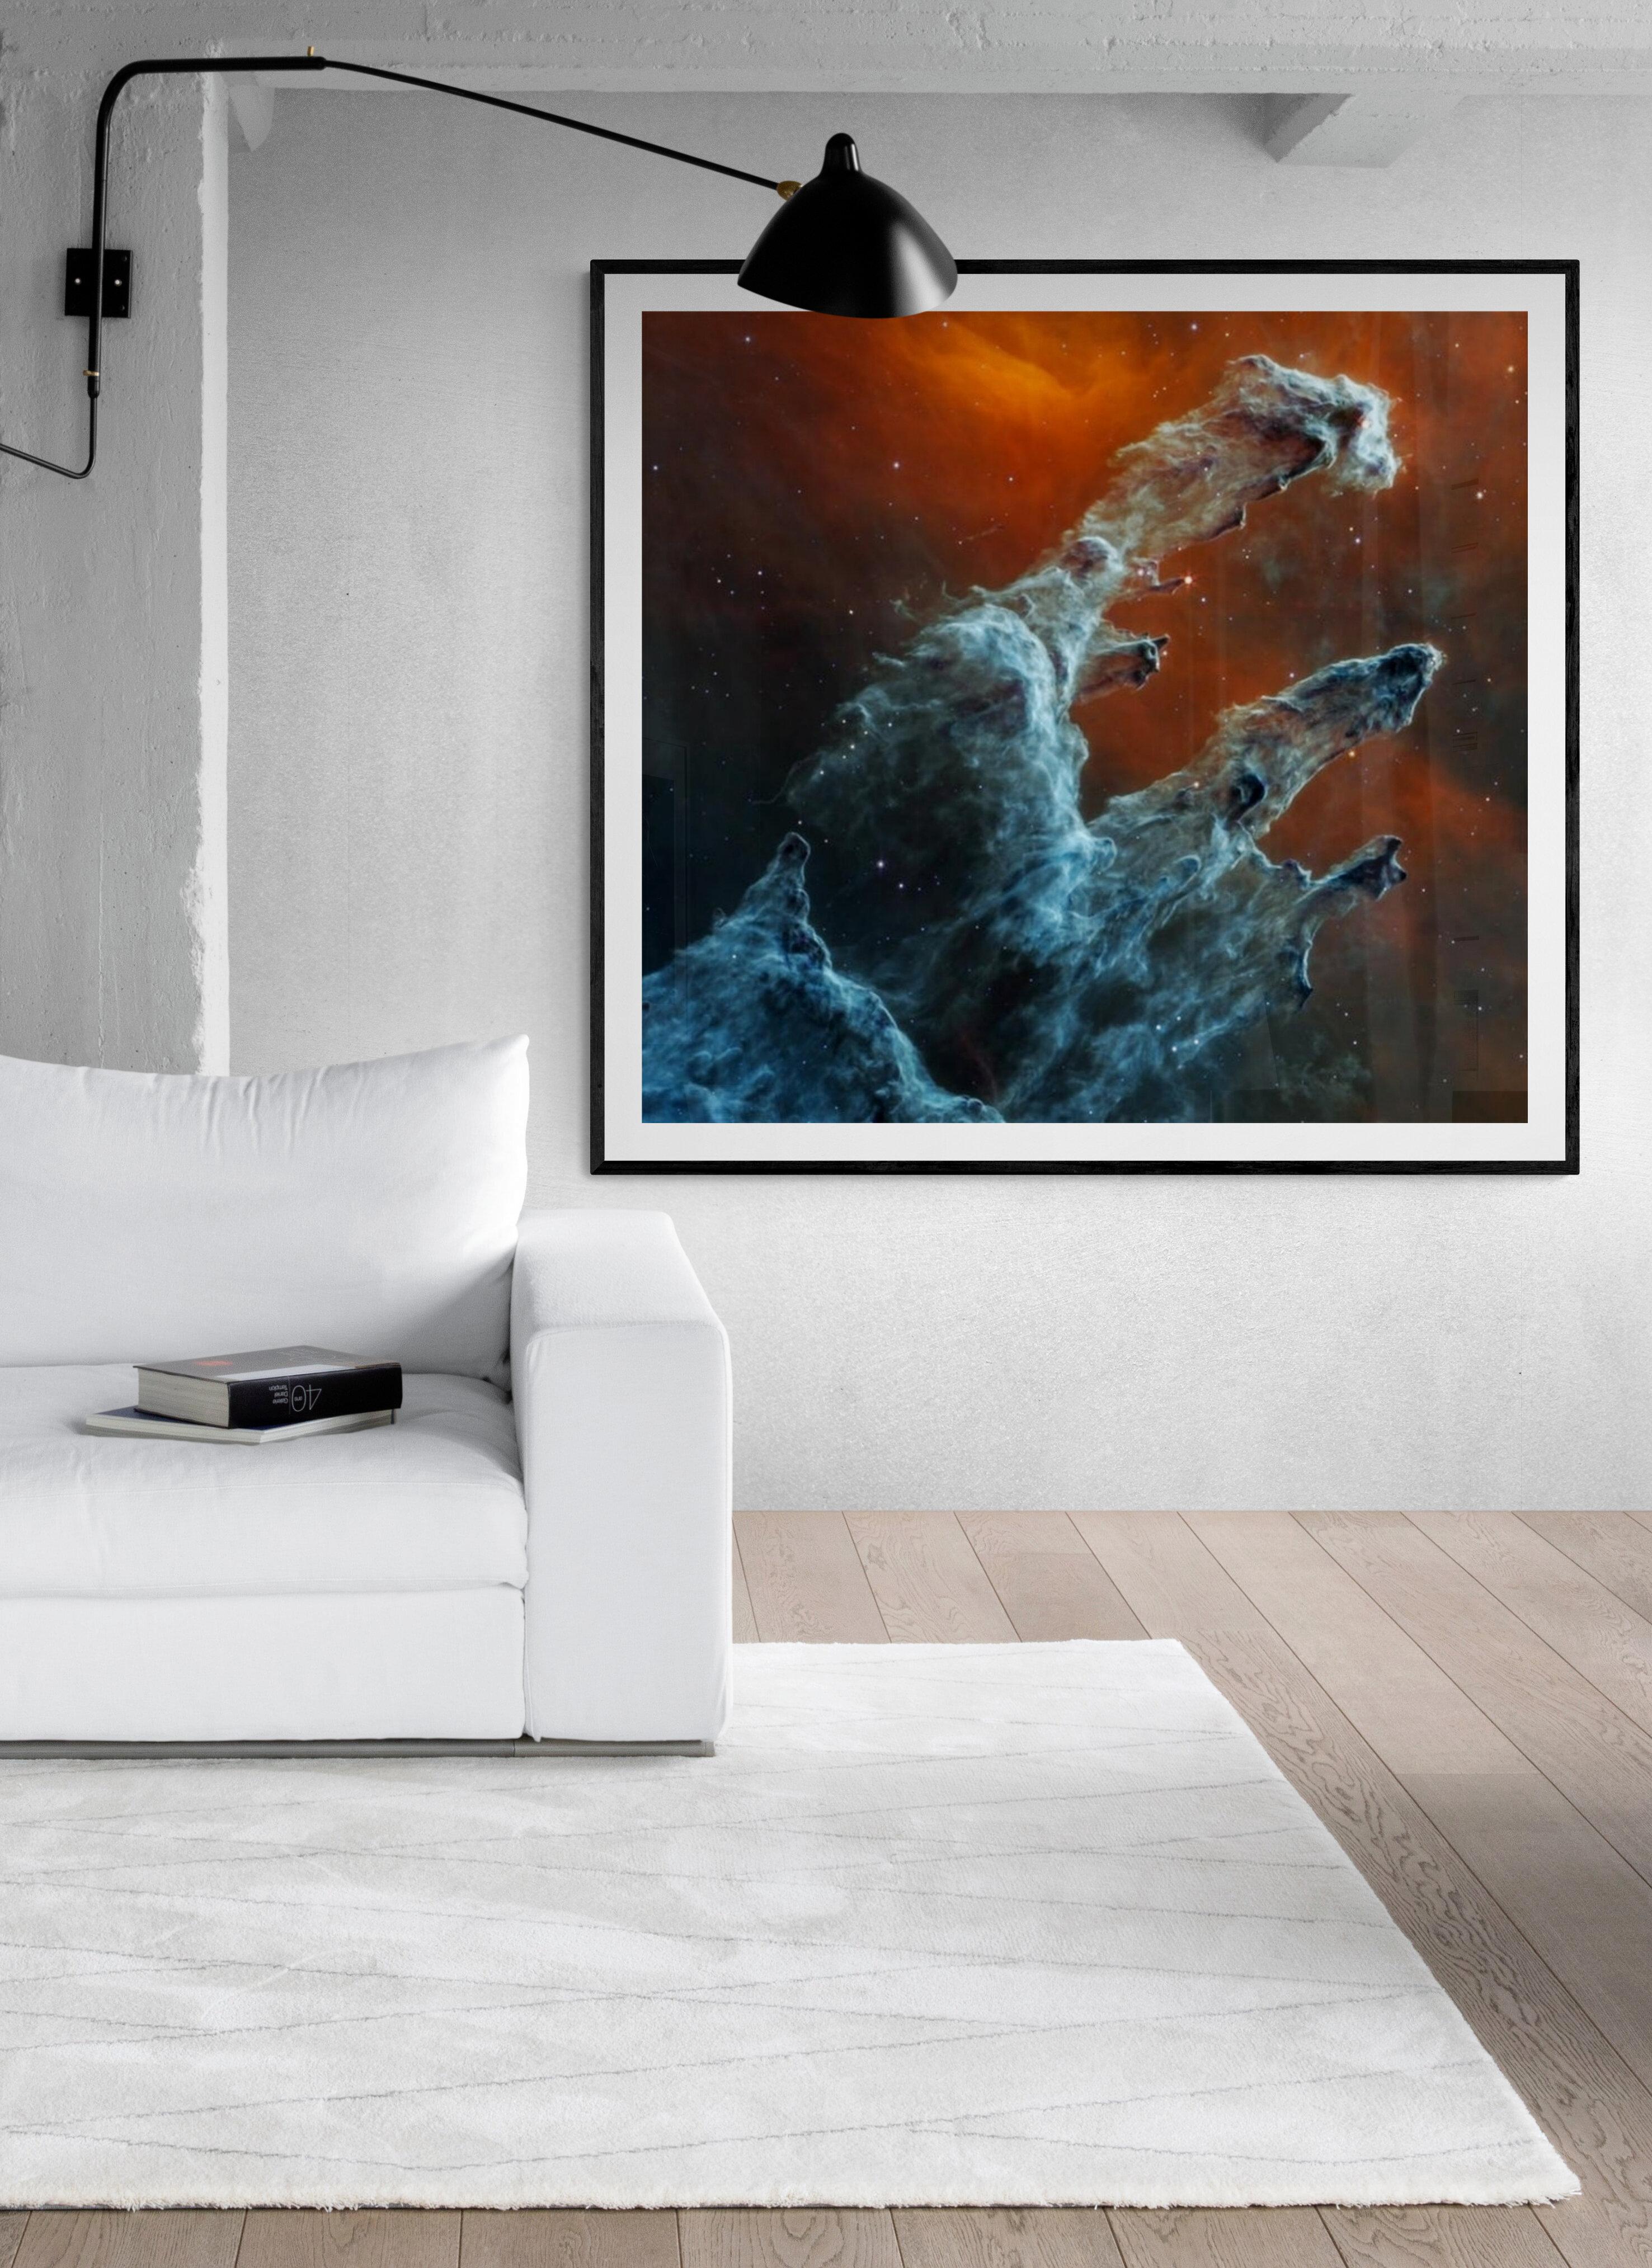 The WEBB imagery is of the most important imagery every taken. 
The finest museum quality WEBB images avialable. 
Printed on archival paper using archival inks.
Framing options available

NASA’s James Webb Space Telescope’s mid-infrared view of the